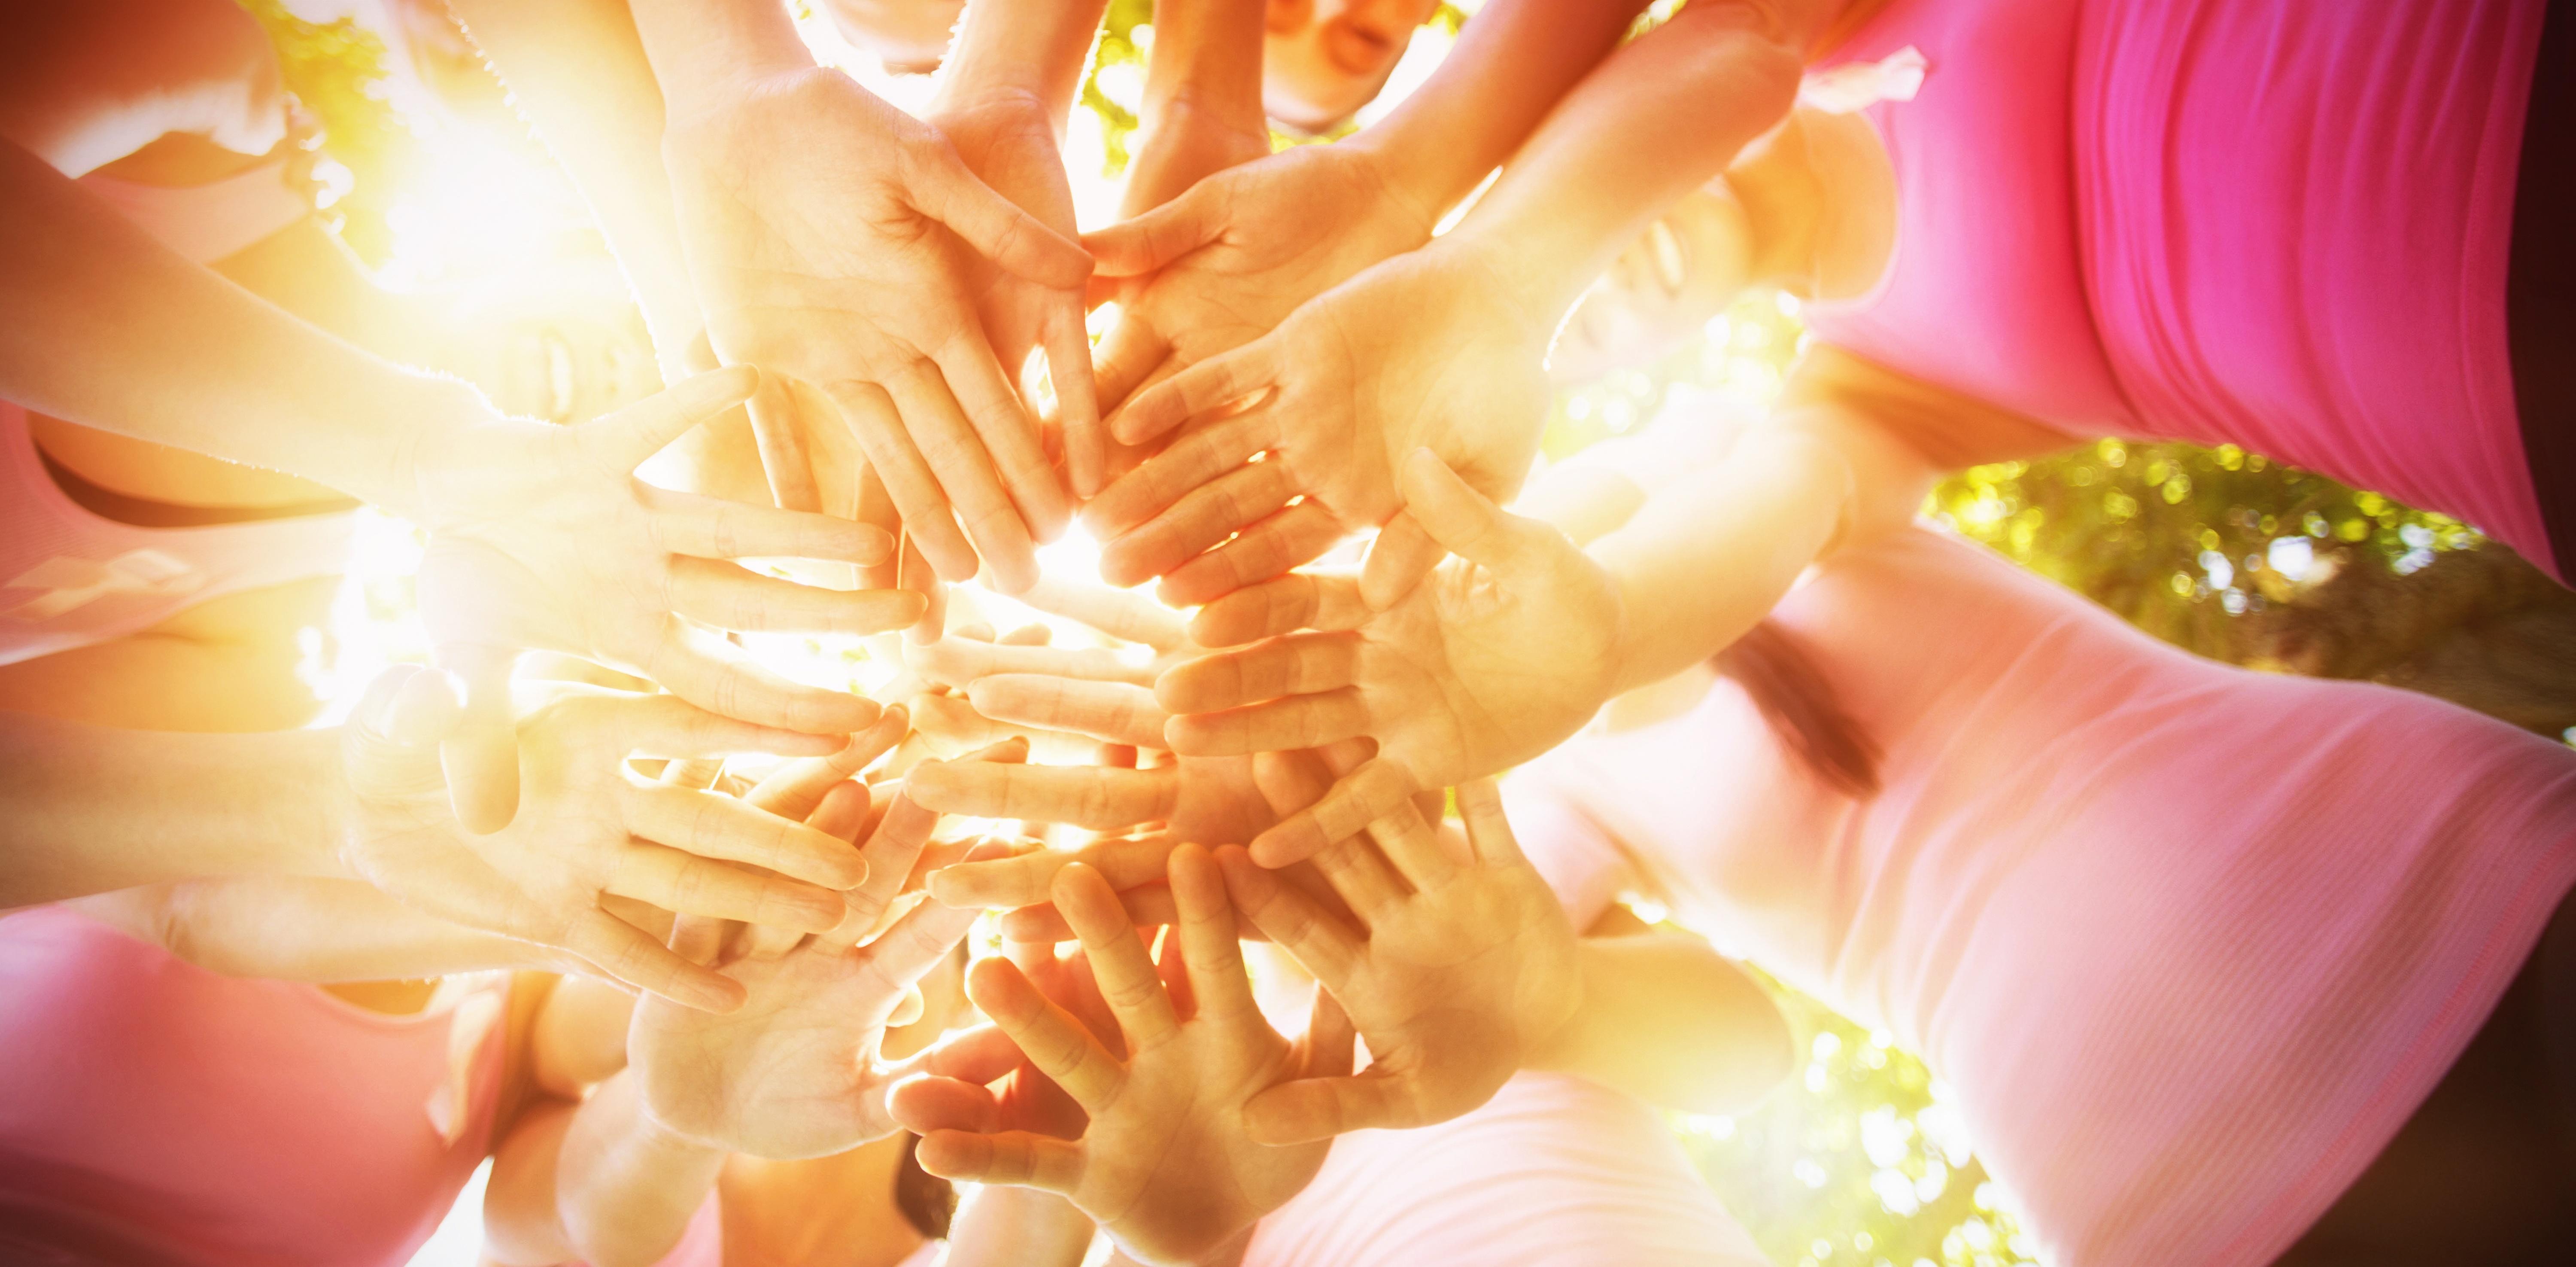 Many women's hands placed together in a circle, illuminated by sunlight shining above them